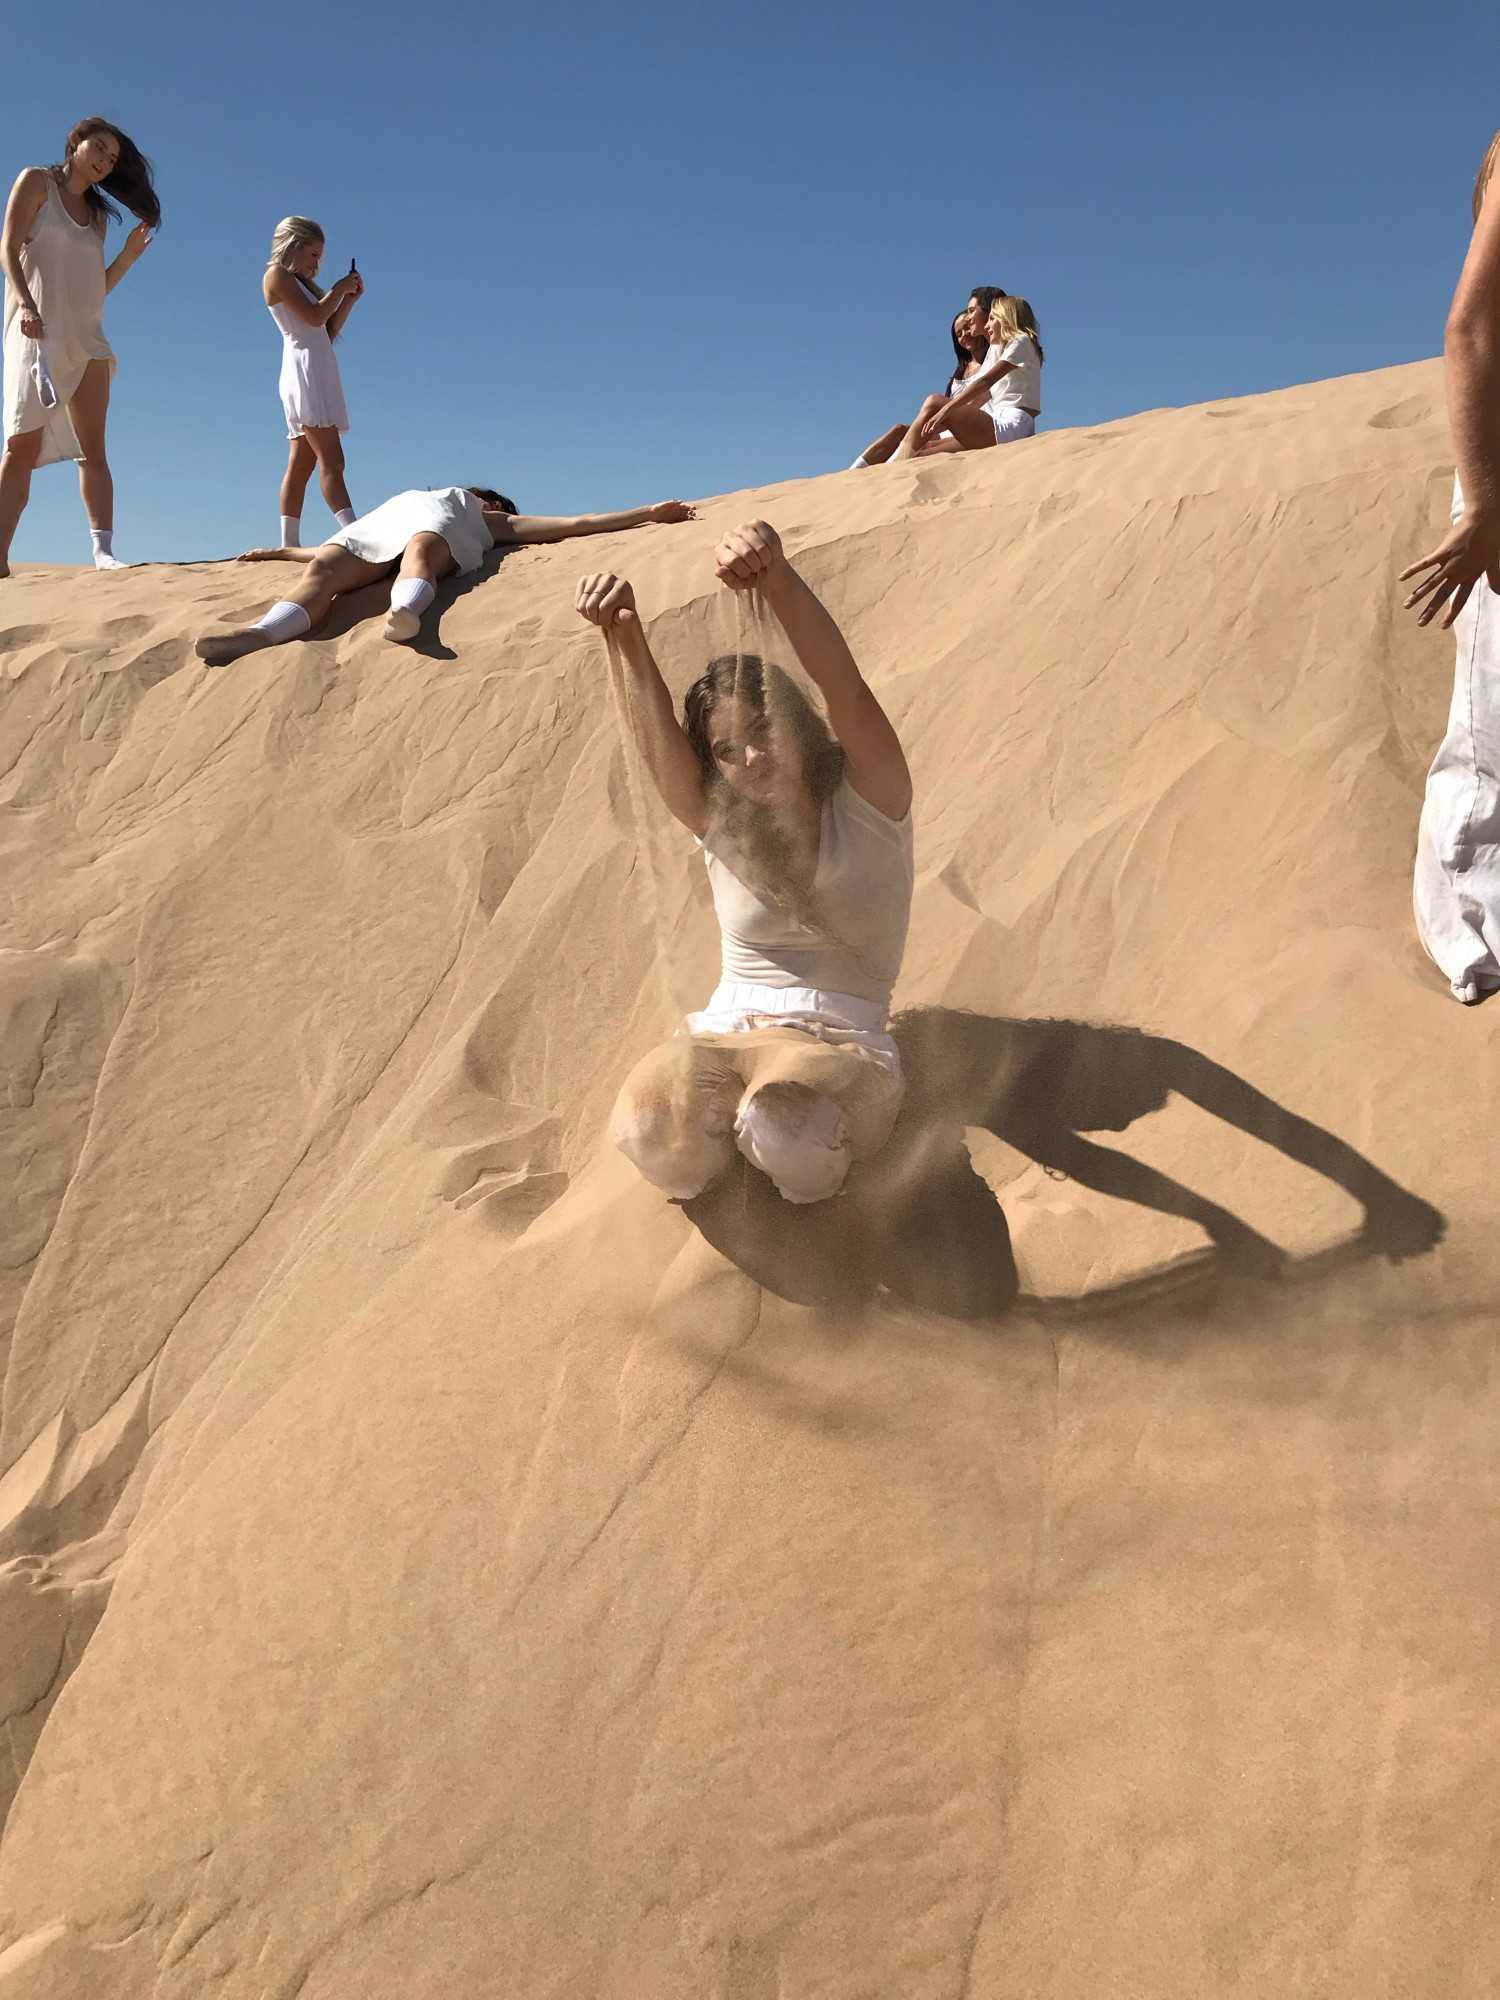  Dancer plays in the sand while in Yuma for the VR ballet shoot. 